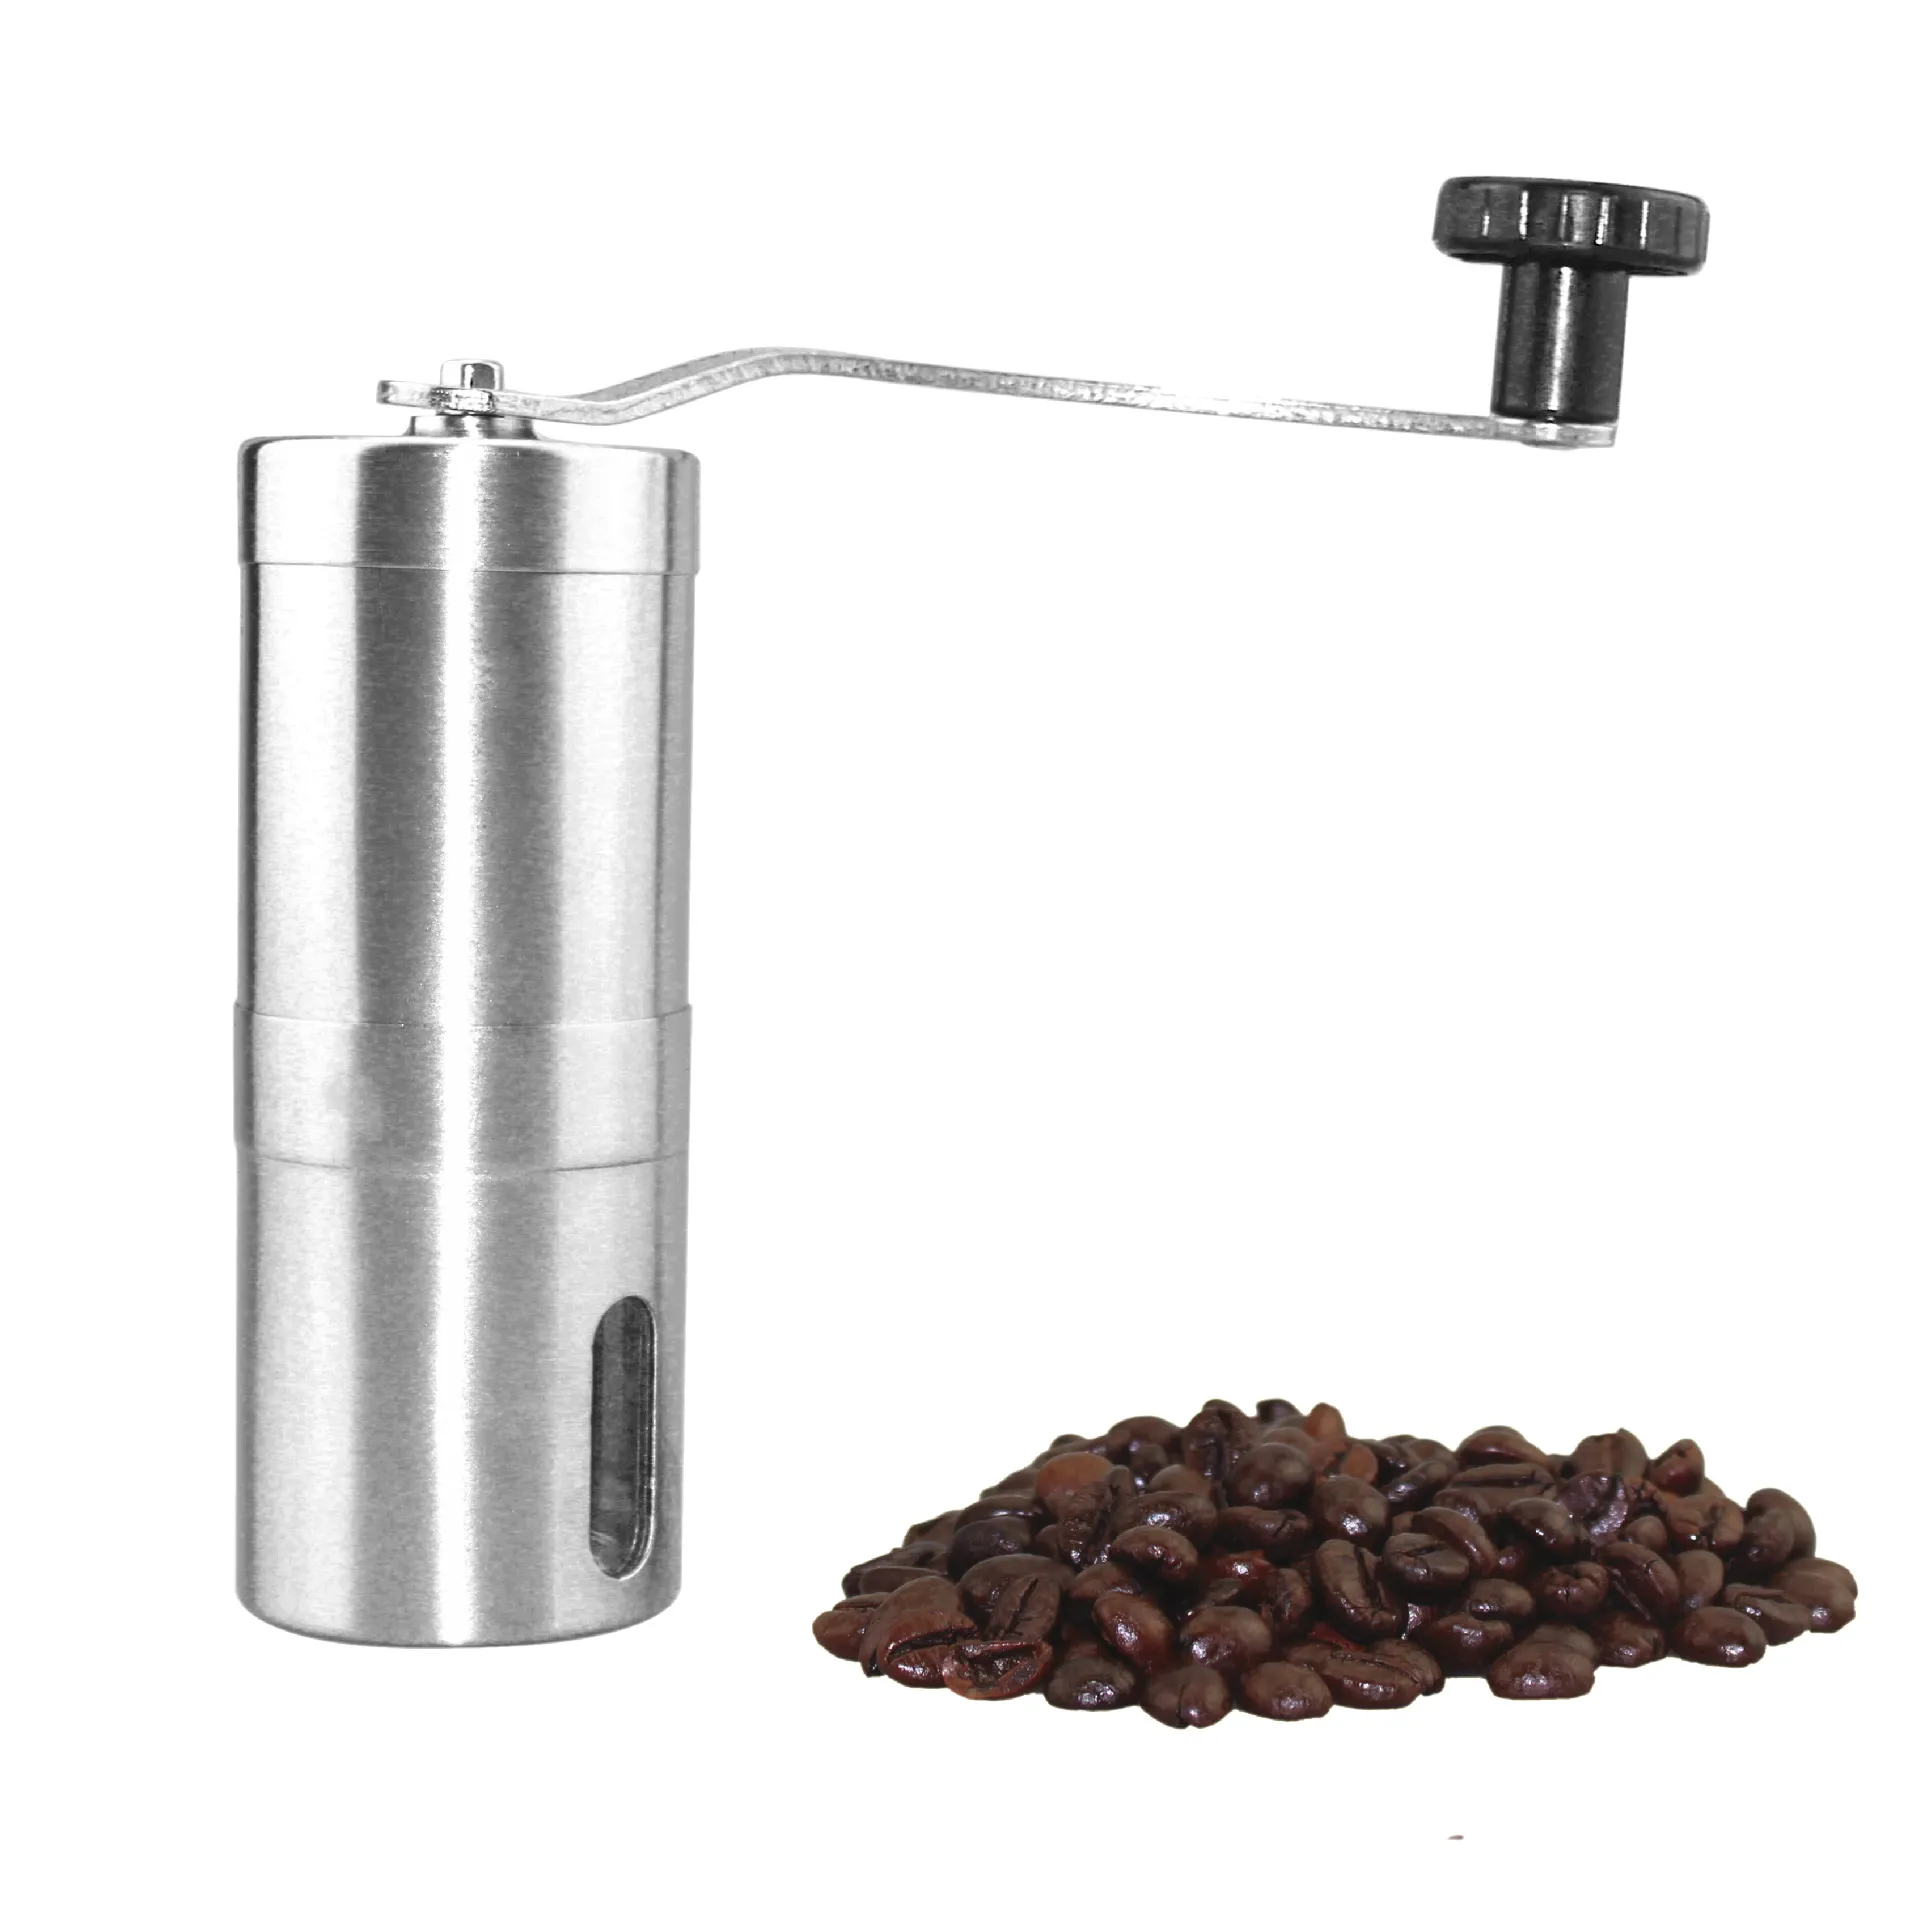 Coffee Bean Mills Grinder Manual Portable Kitchen Grinding Tools Stainless Steel Perfumery Cafe Bar Handmade Support OEM 